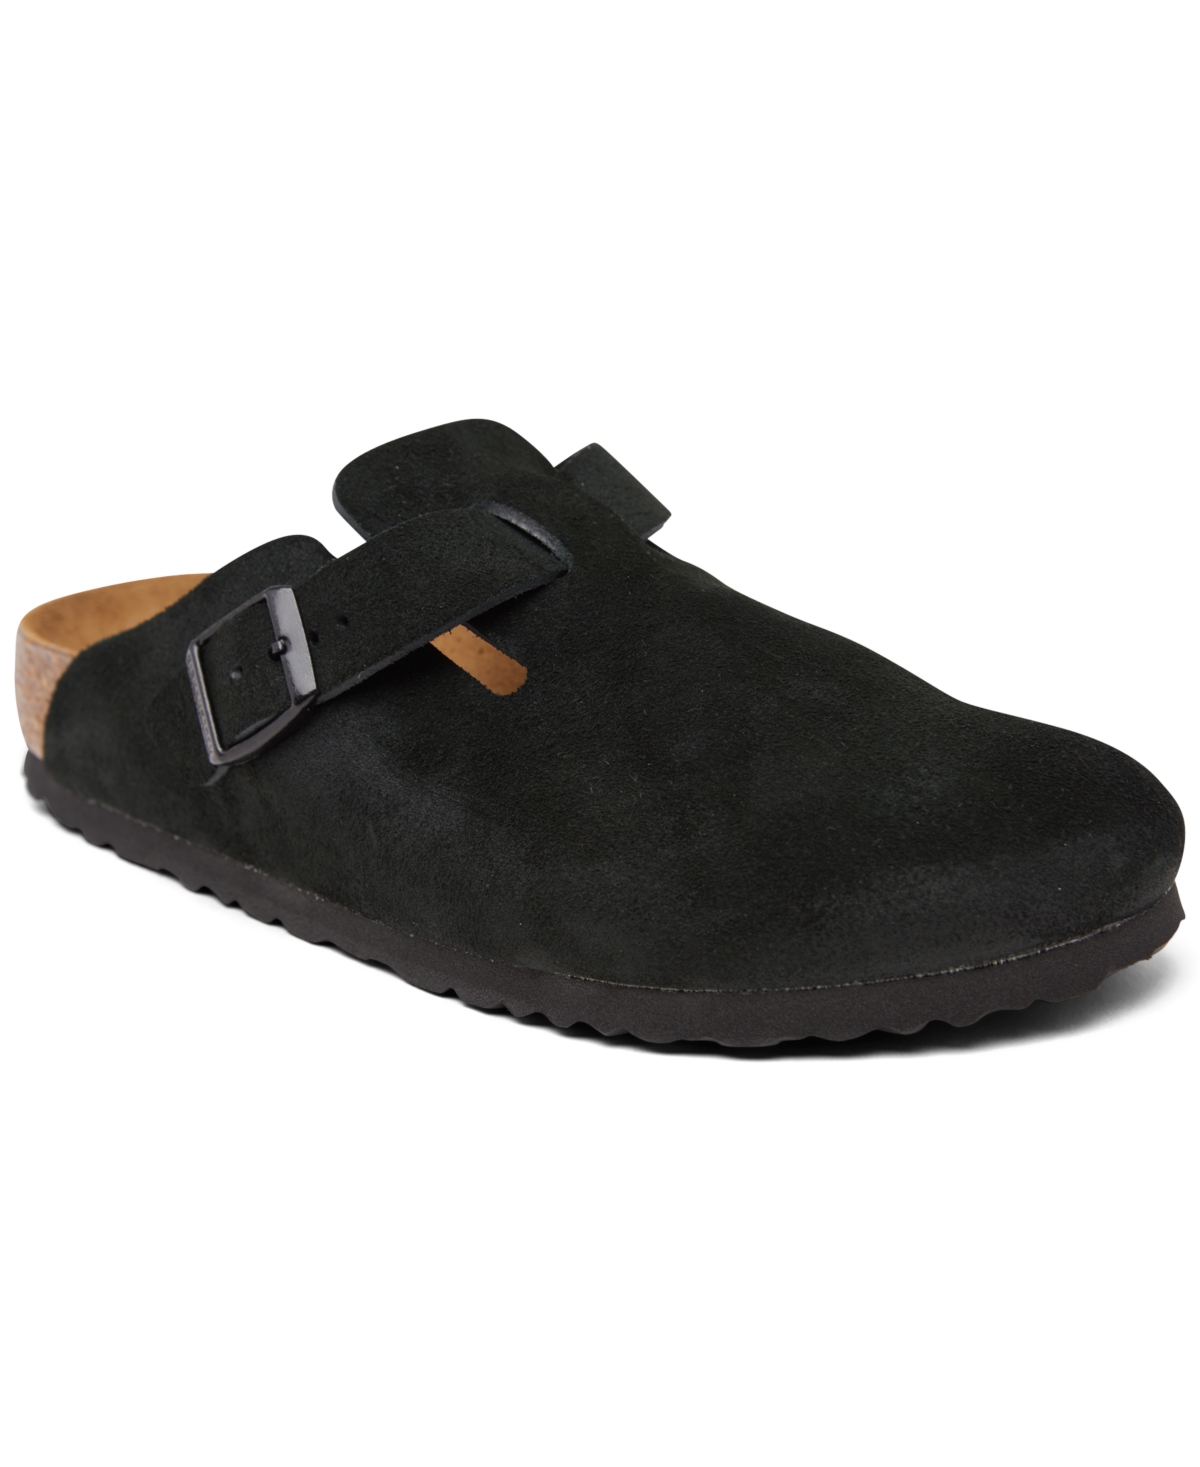 Women's Boston Soft Footbed Suede Leather Clogs from Finish Line - Cork Brown